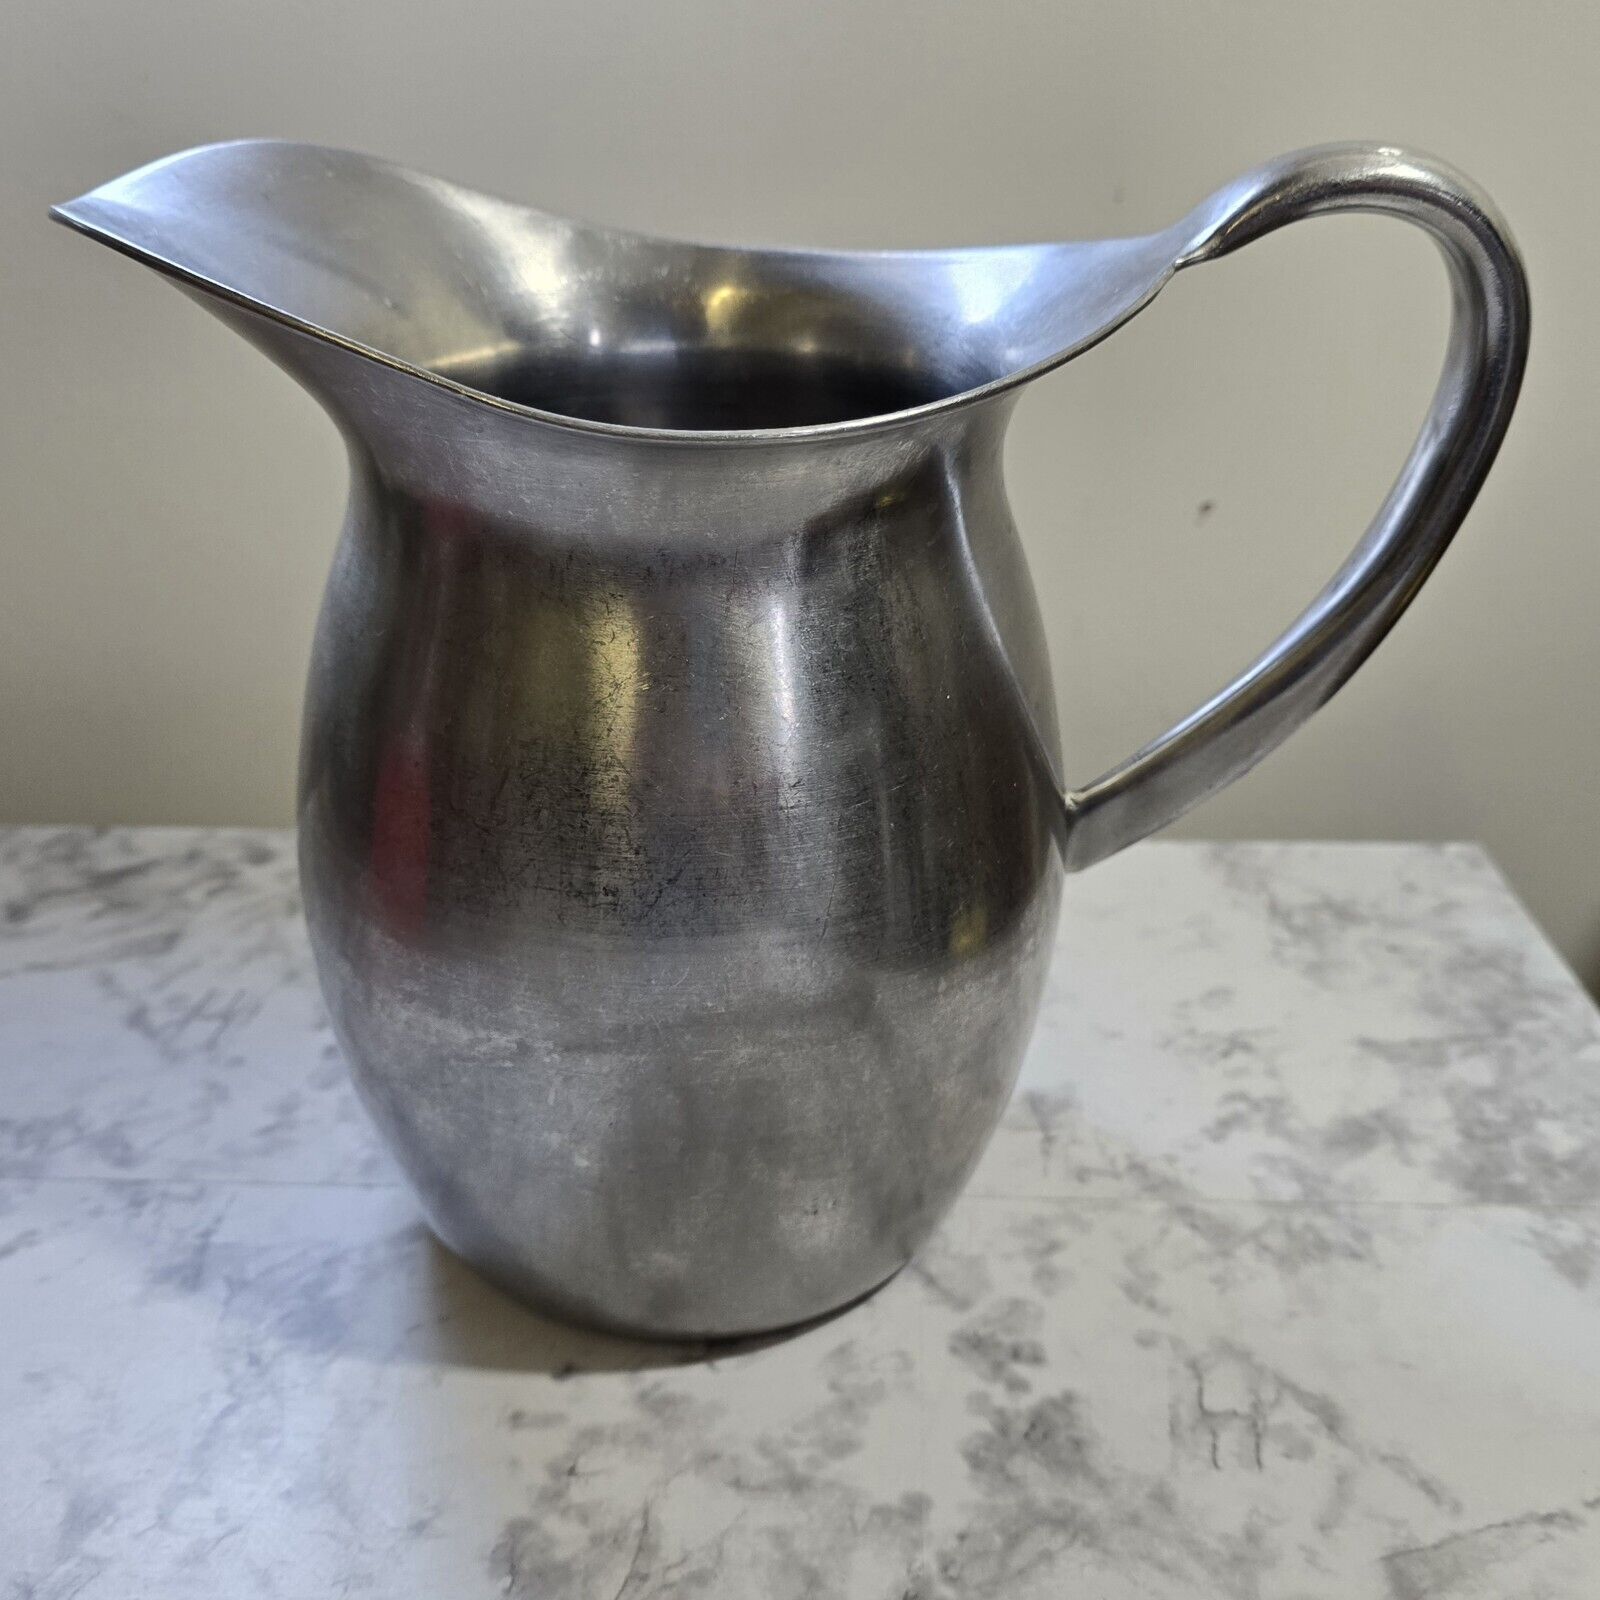 The Vollrath Co. stainless steel pitcher Vintage large 8 inches tall USAMD